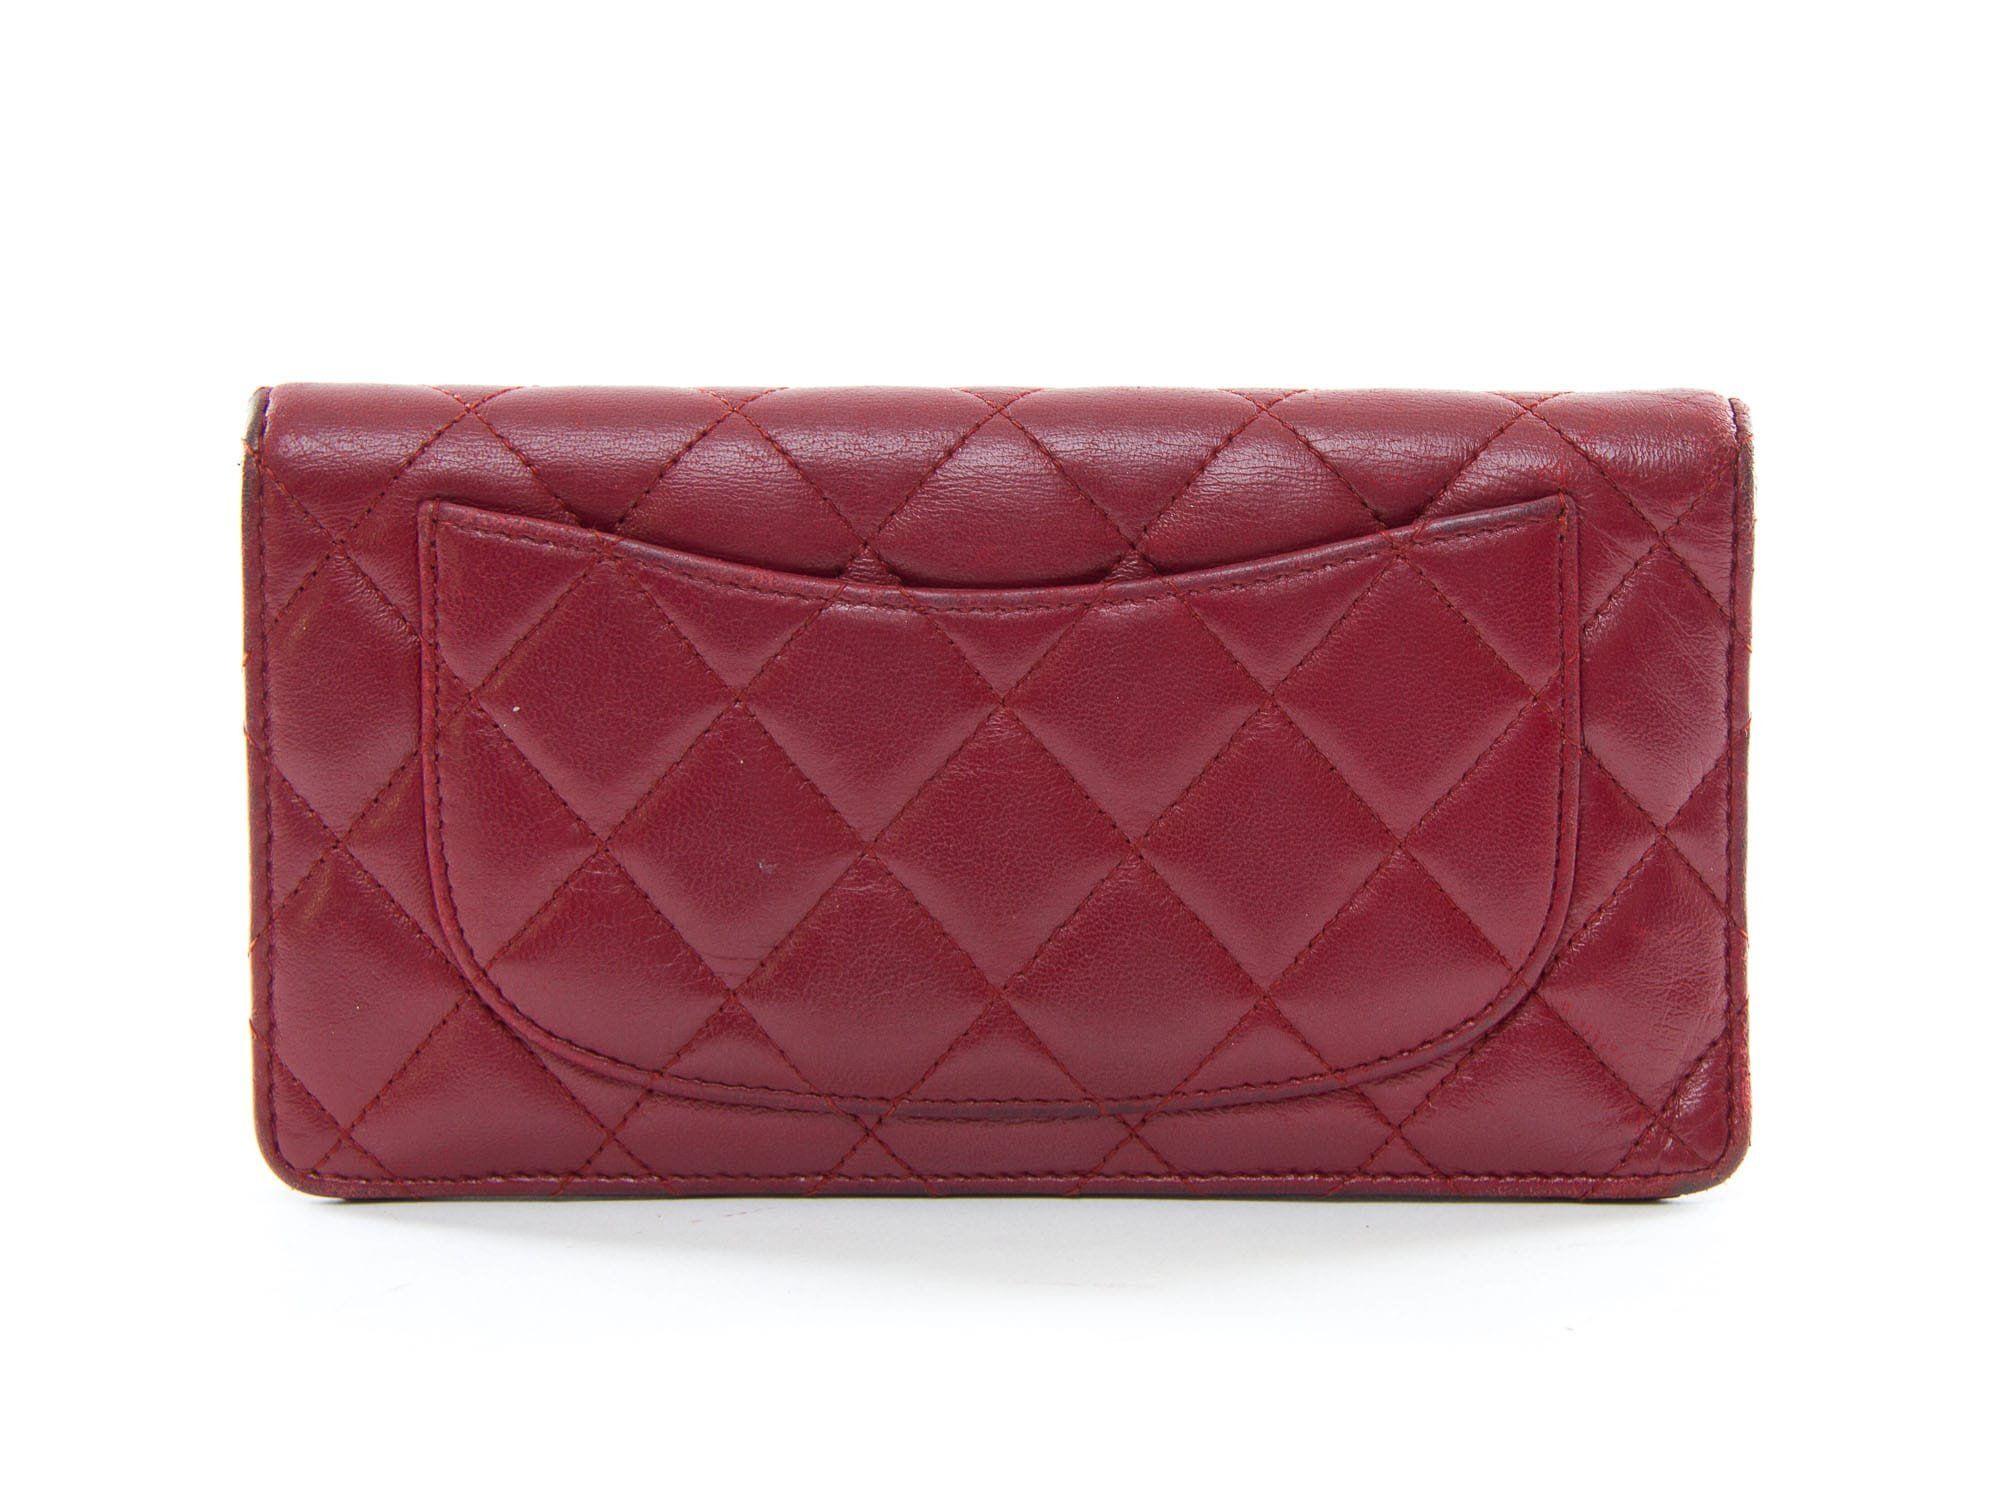 Red CC Logo - Authentic Chanel CC logo Lambskin Red Bi-fold long wallet | Connect ...